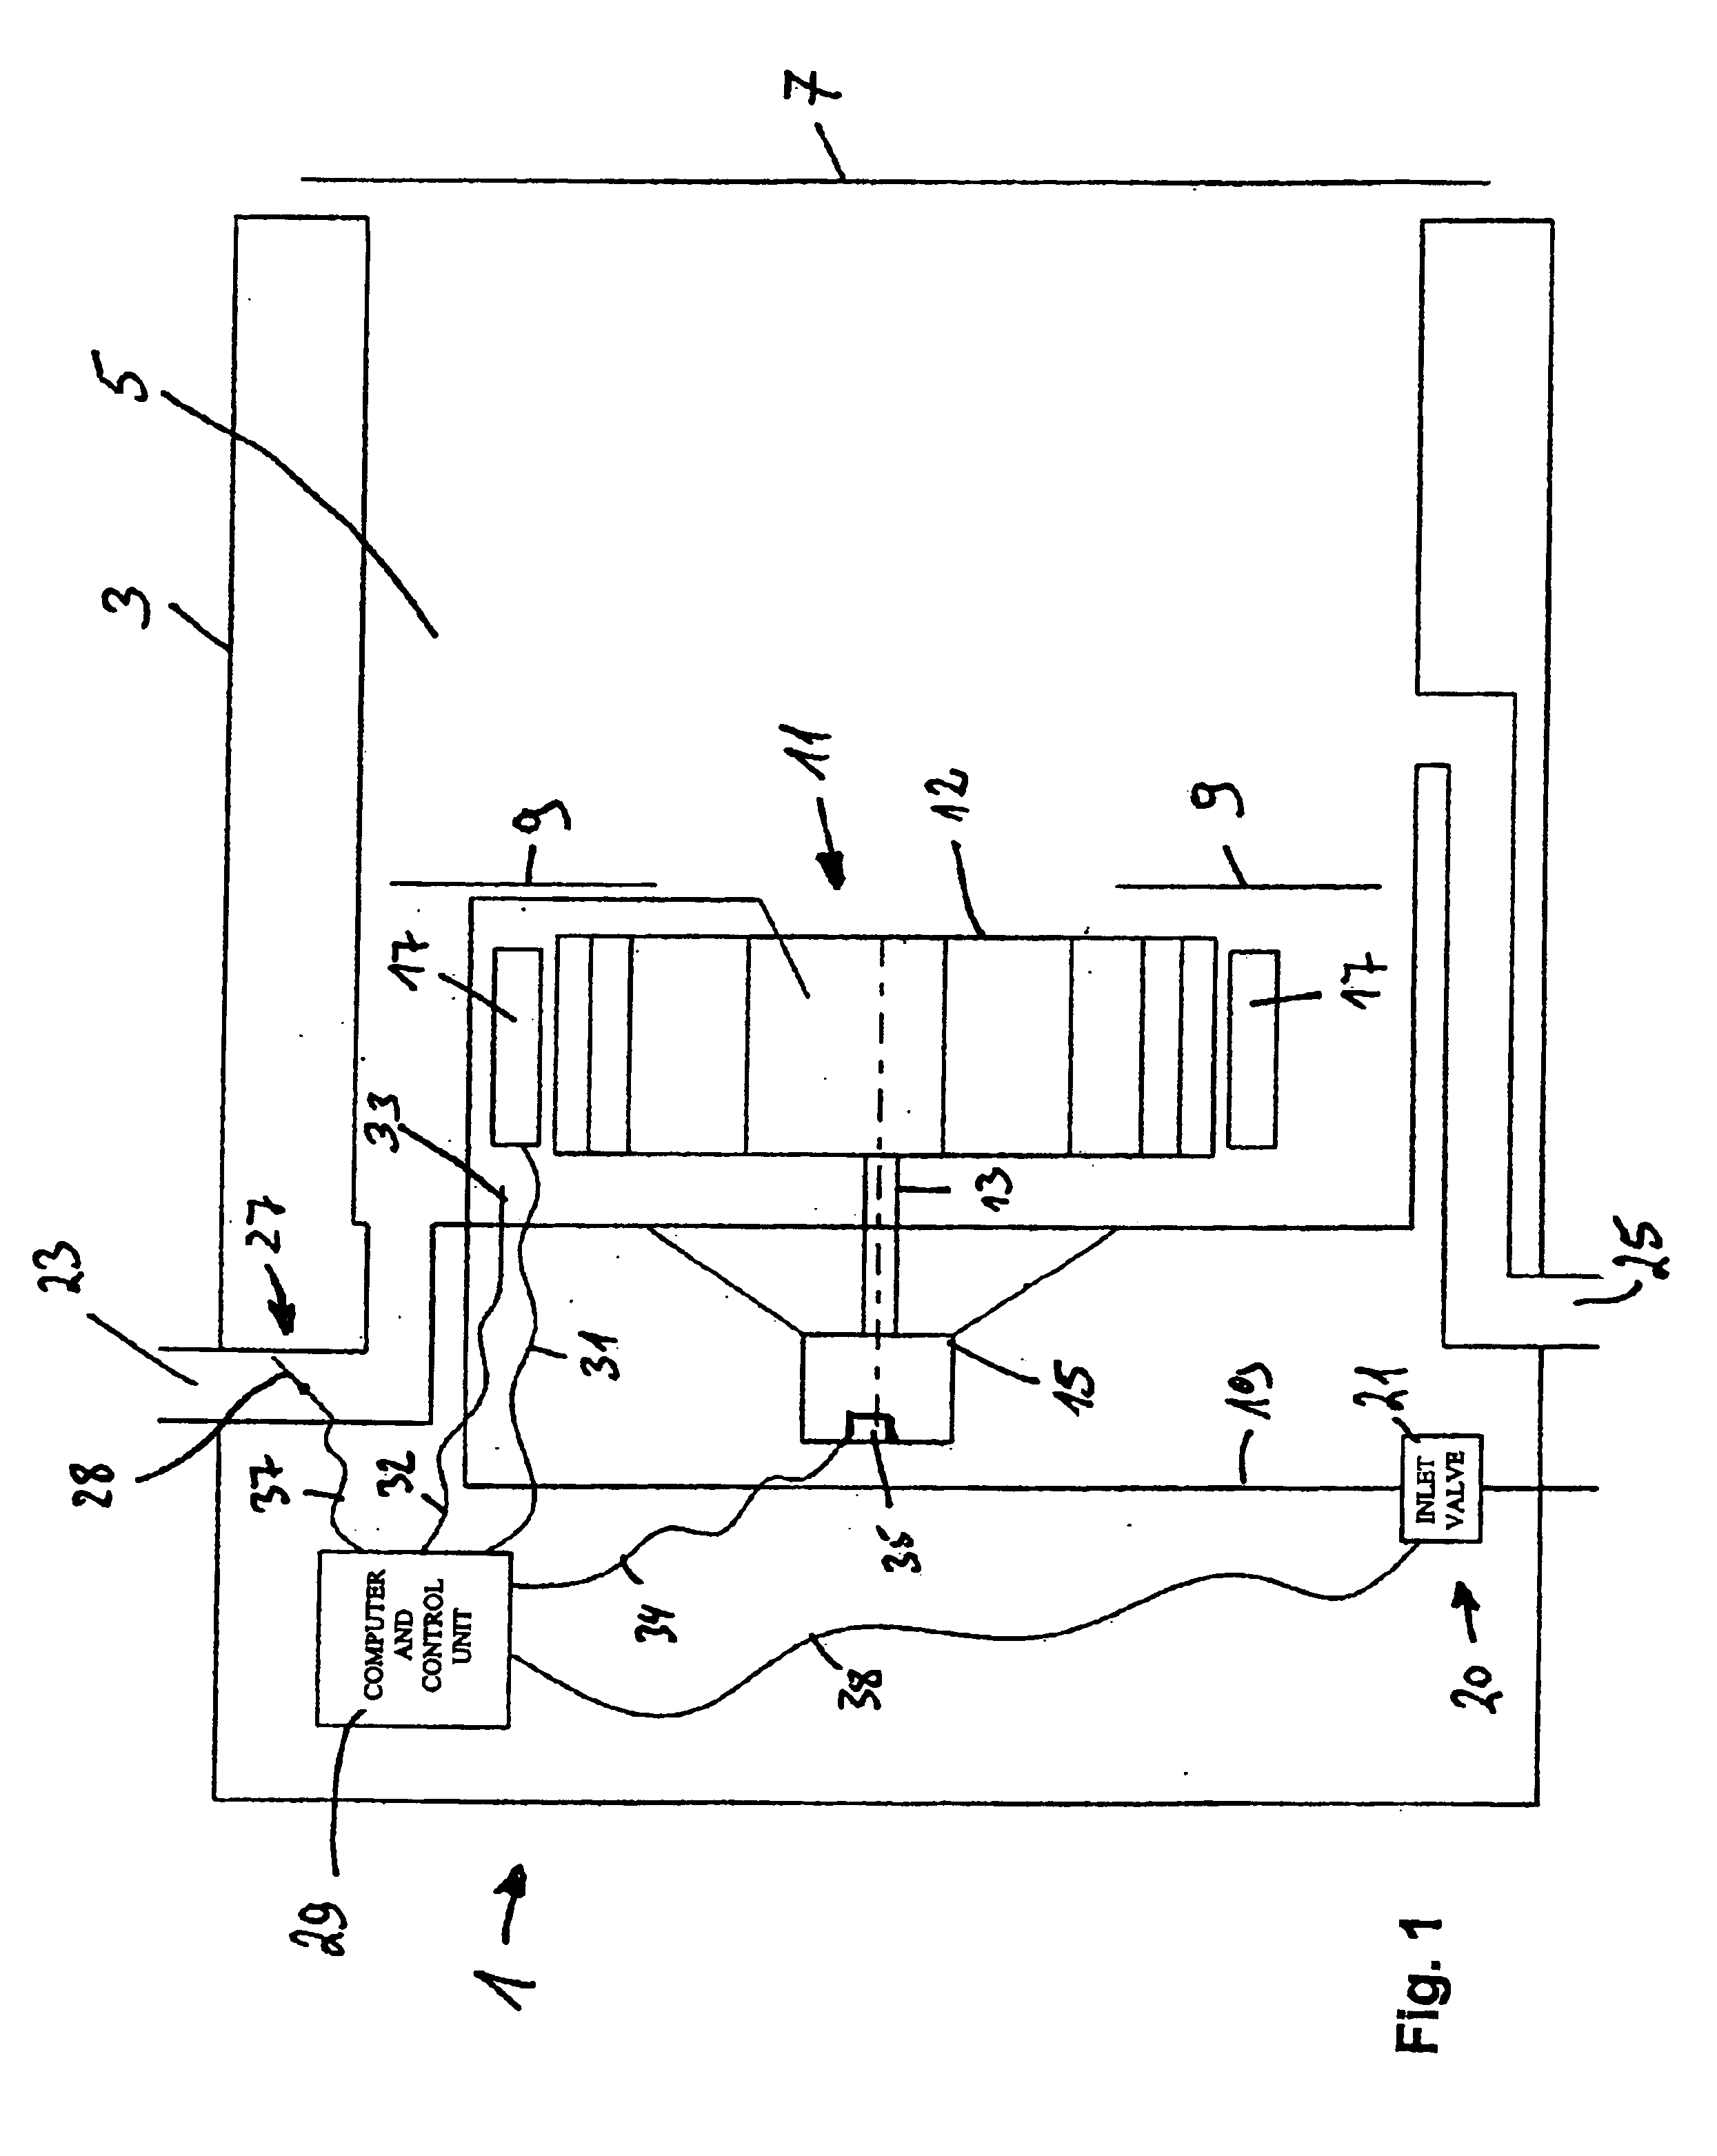 Method for detecting moisture level in apparatus for treating and preparing food and related food treatment and preparation apparatus